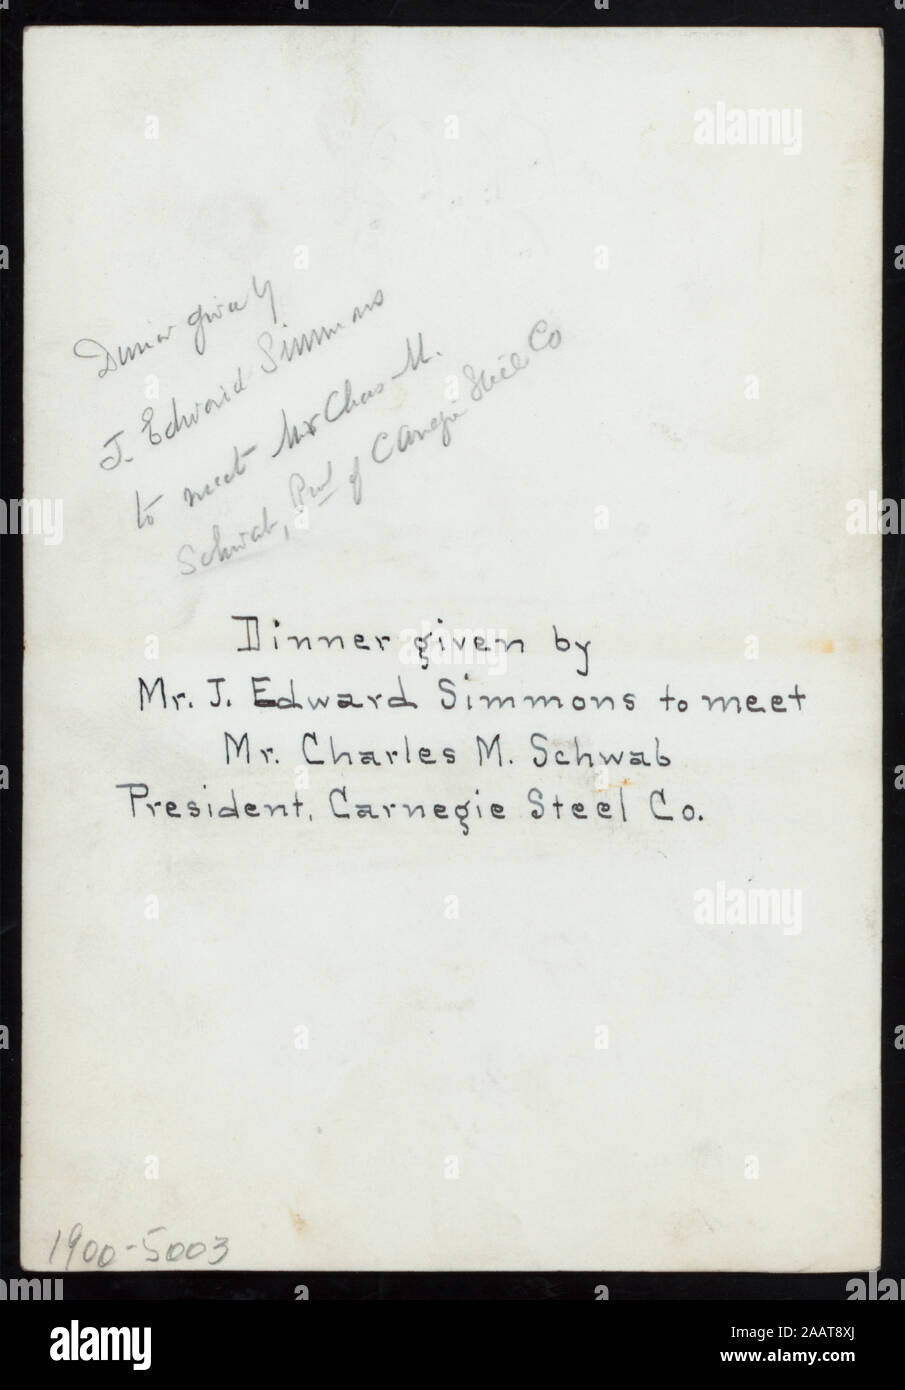 DINNER TO MEET CHARLES SCHWAB,PRESIDENT OF CARNEGIE STEEL CO) (held by) (JEDWARD SIMMONS) (at) UNIVERSITY CLUB (OTHER (PRIVATE CLUB);) SPONSOR AND EVENT HANDWRITTEN ON BACK IN PENCIL; FRENCH MENU; MONOGRAM; DINNER TO MEET CHARLES SCHWAB, PRESIDENT OF CARNEGIE STEEL CO.] [held by] [J.EDWARD SIMMONS?] [at] UNIVERSITY CLUB (OTHER (PRIVATE CLUB);) Stock Photo